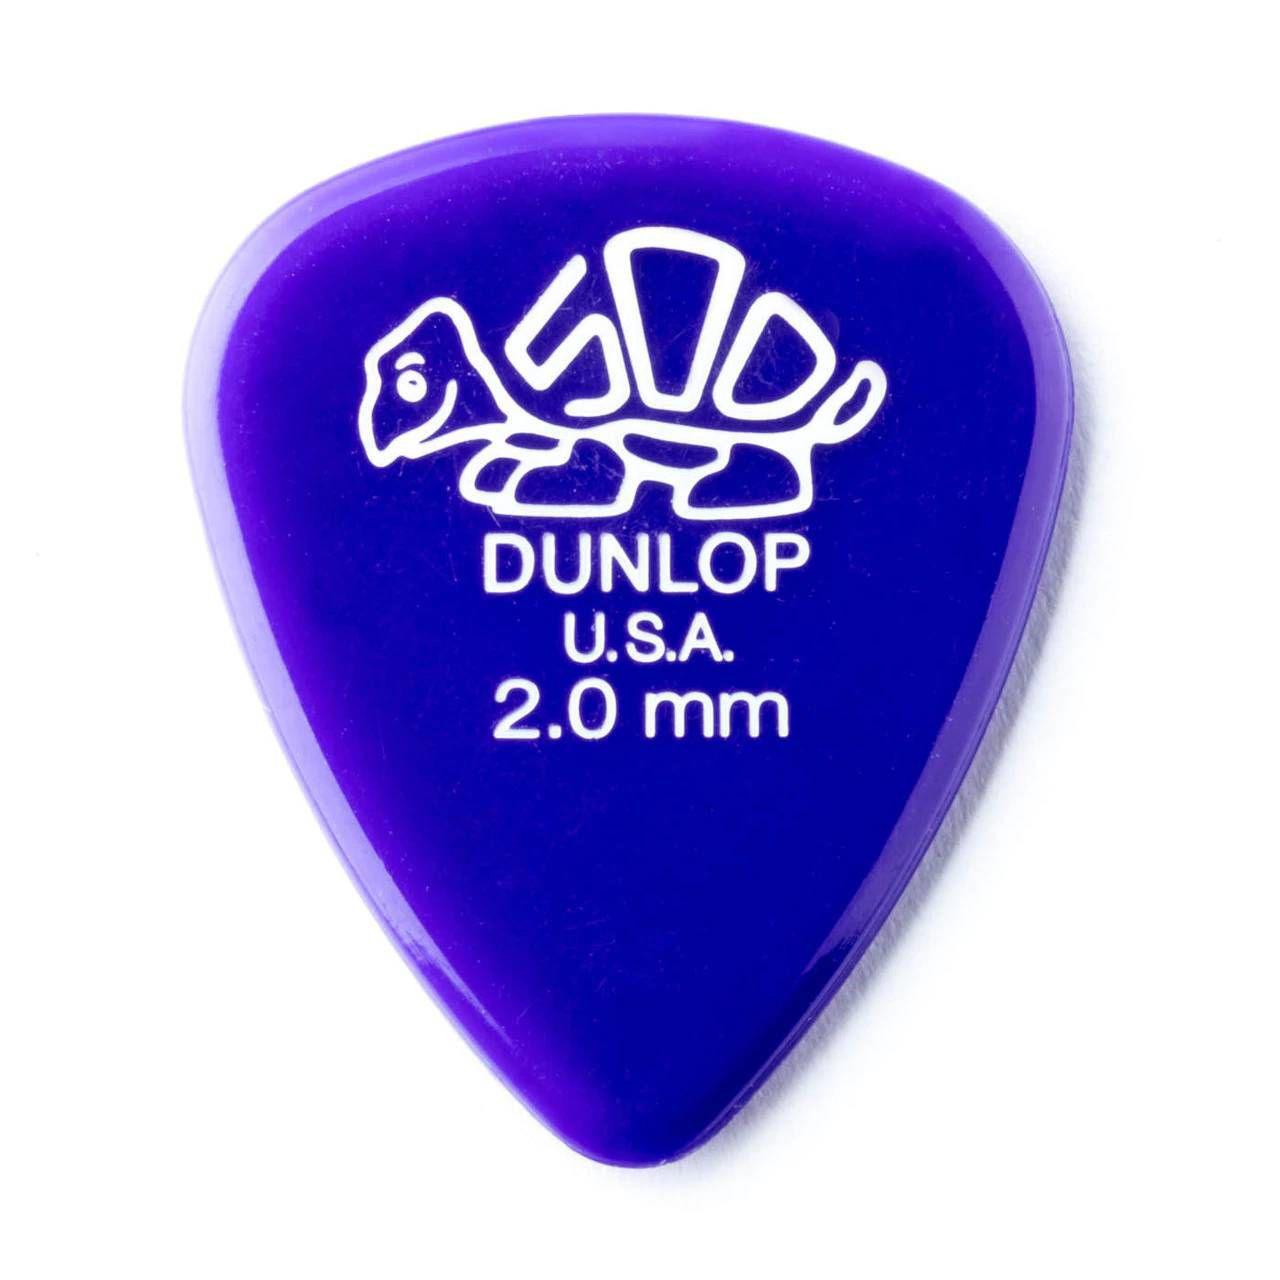 2.00mm Pick Delrin Player Pack 12 Pack - Guitars - Picks by Jim Dunlop at Muso's Stuff